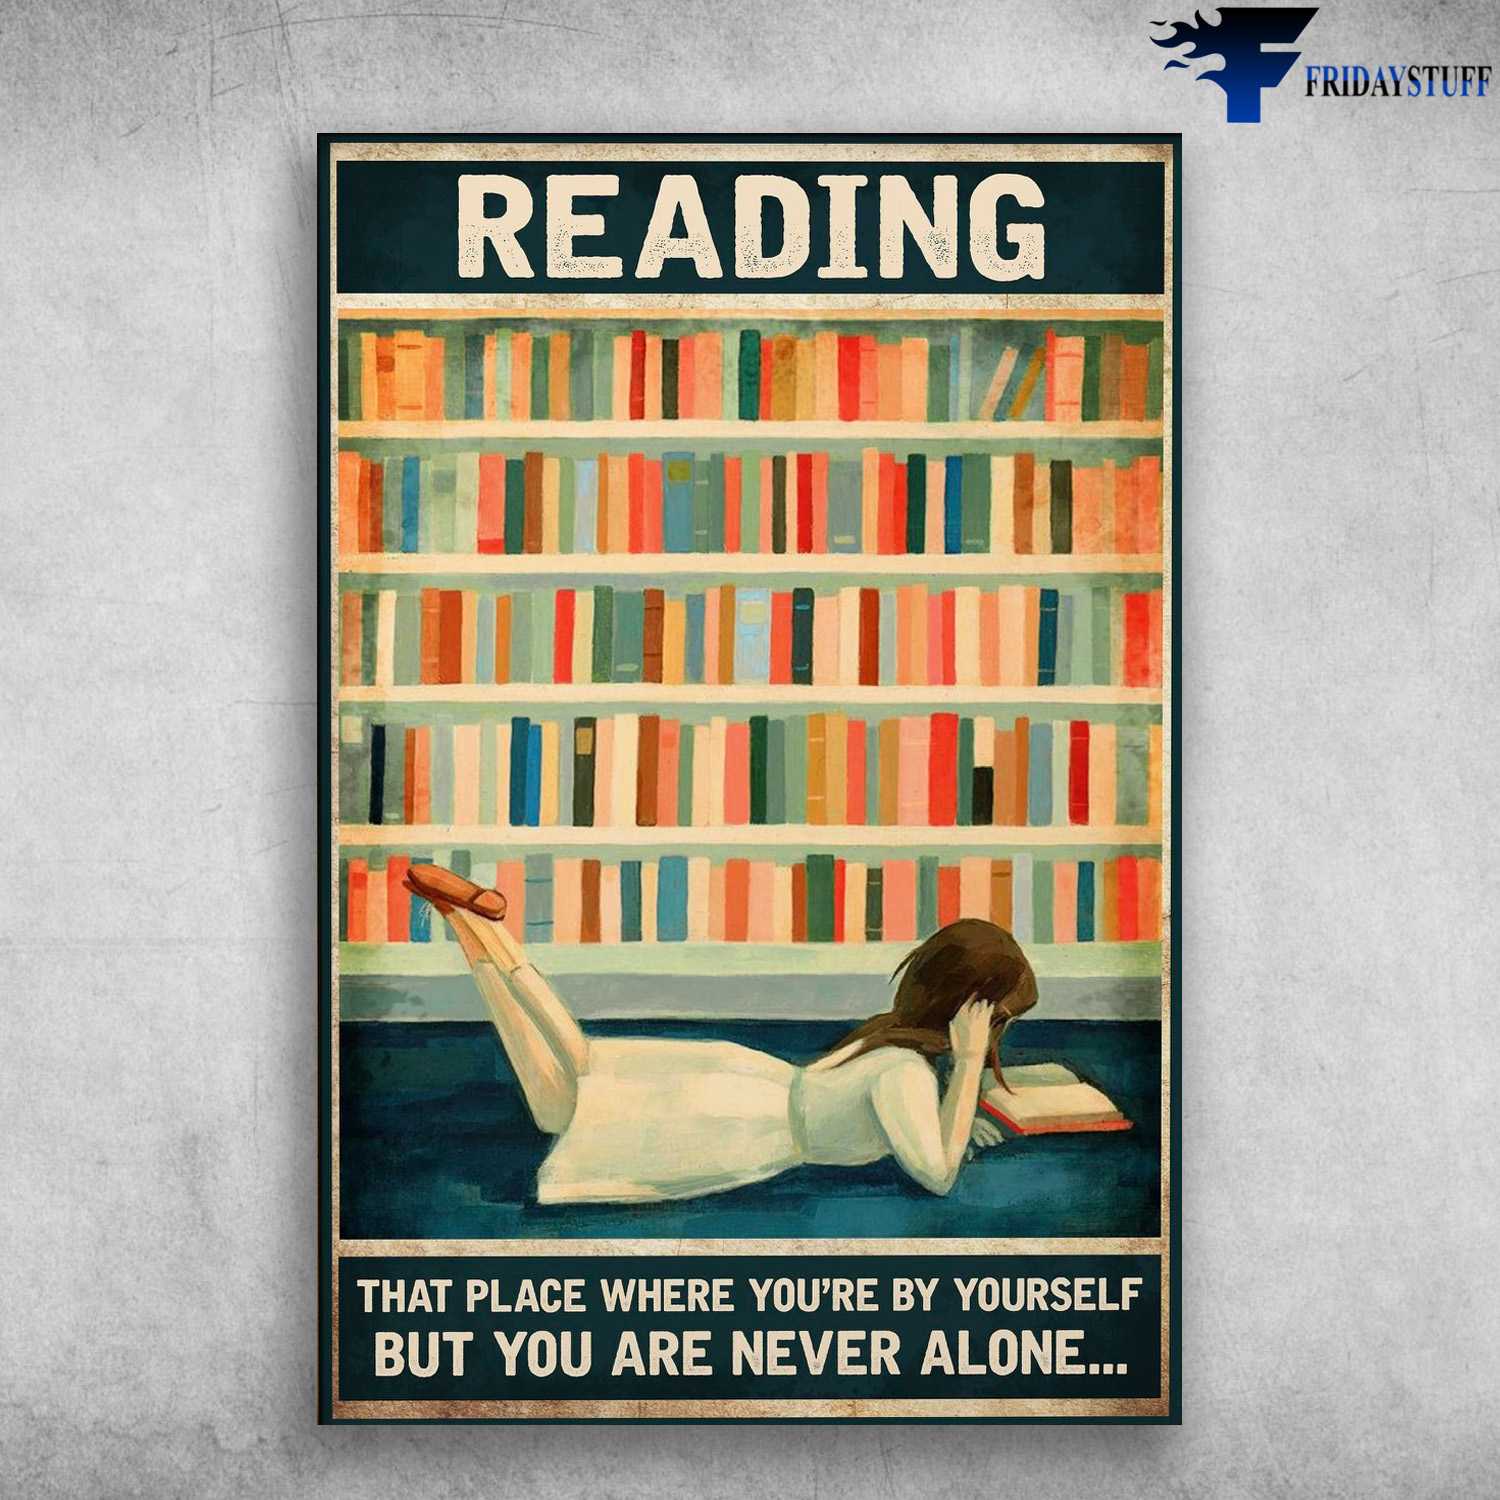 Book Lover, Reading Book, Reading That Place Where You're By Yourself, But You Are Never Alone